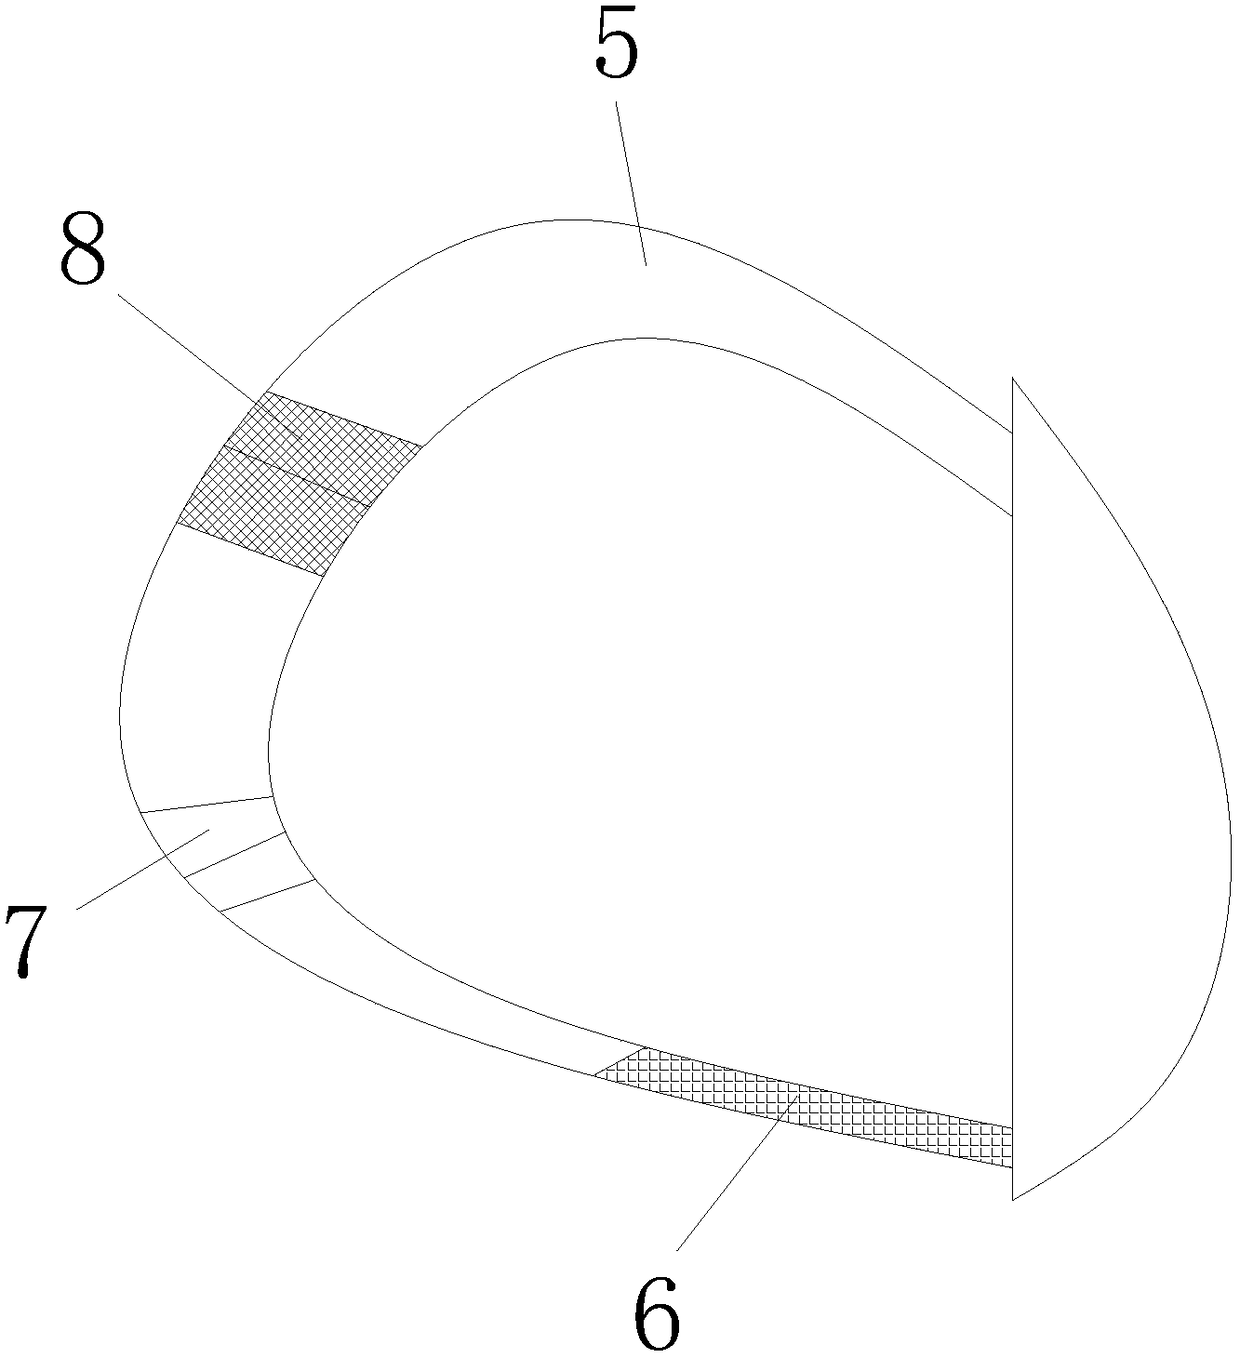 Postoperative pressurization device for cardiac pacemakers